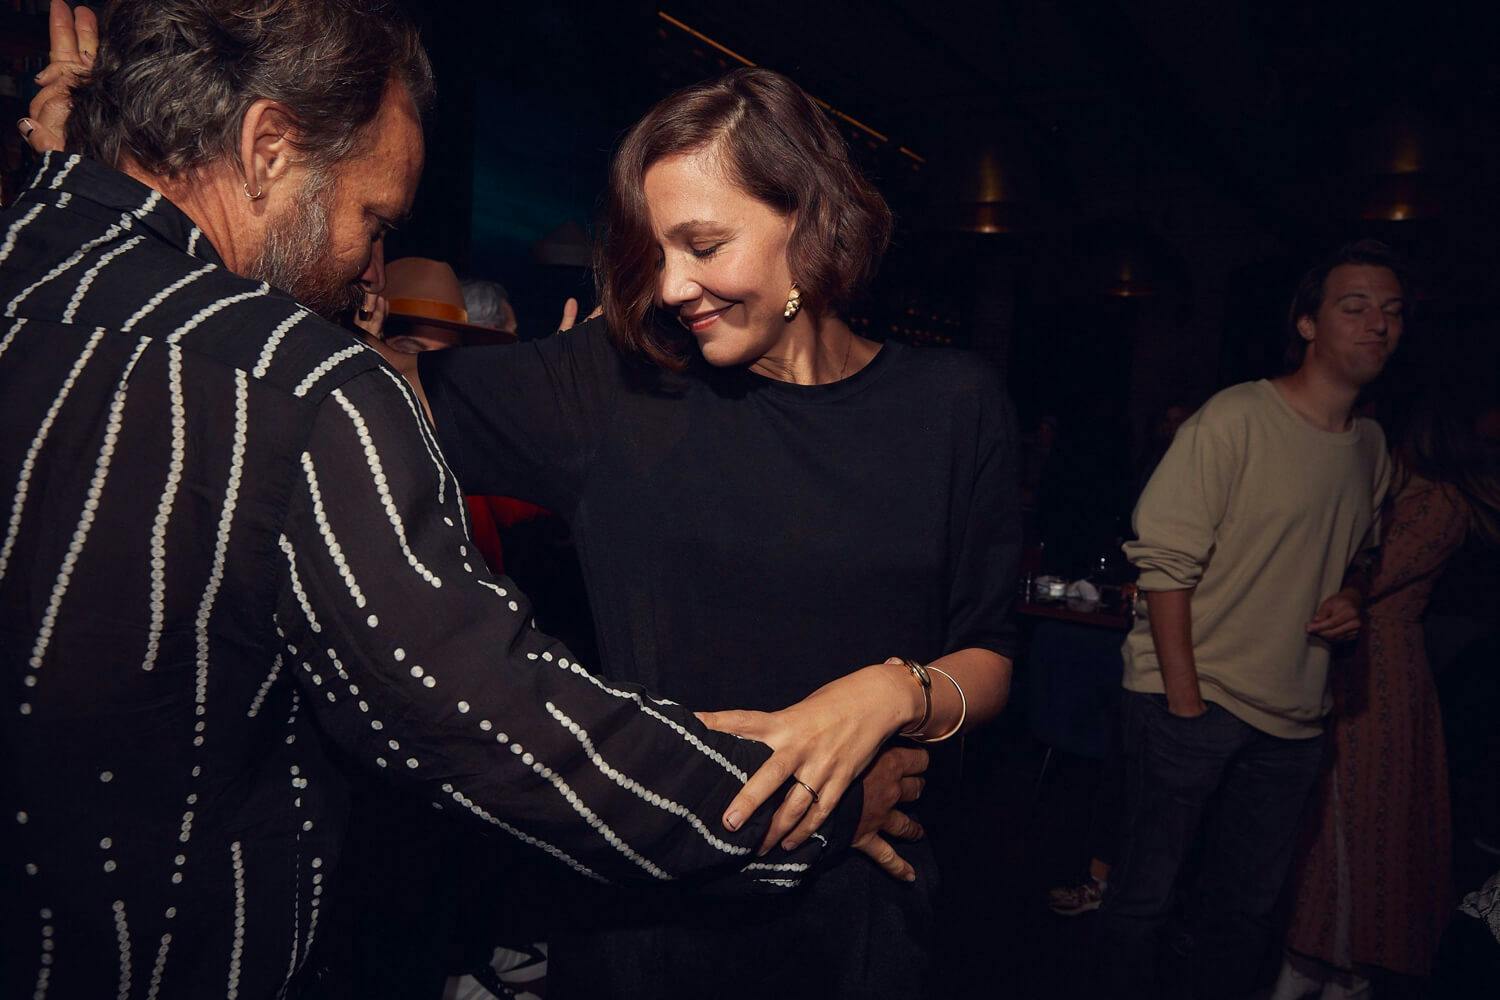 Maggie Gyllenhaal and Peter Sarsgaard dancing together at the Telluride Film Festival, 2021.